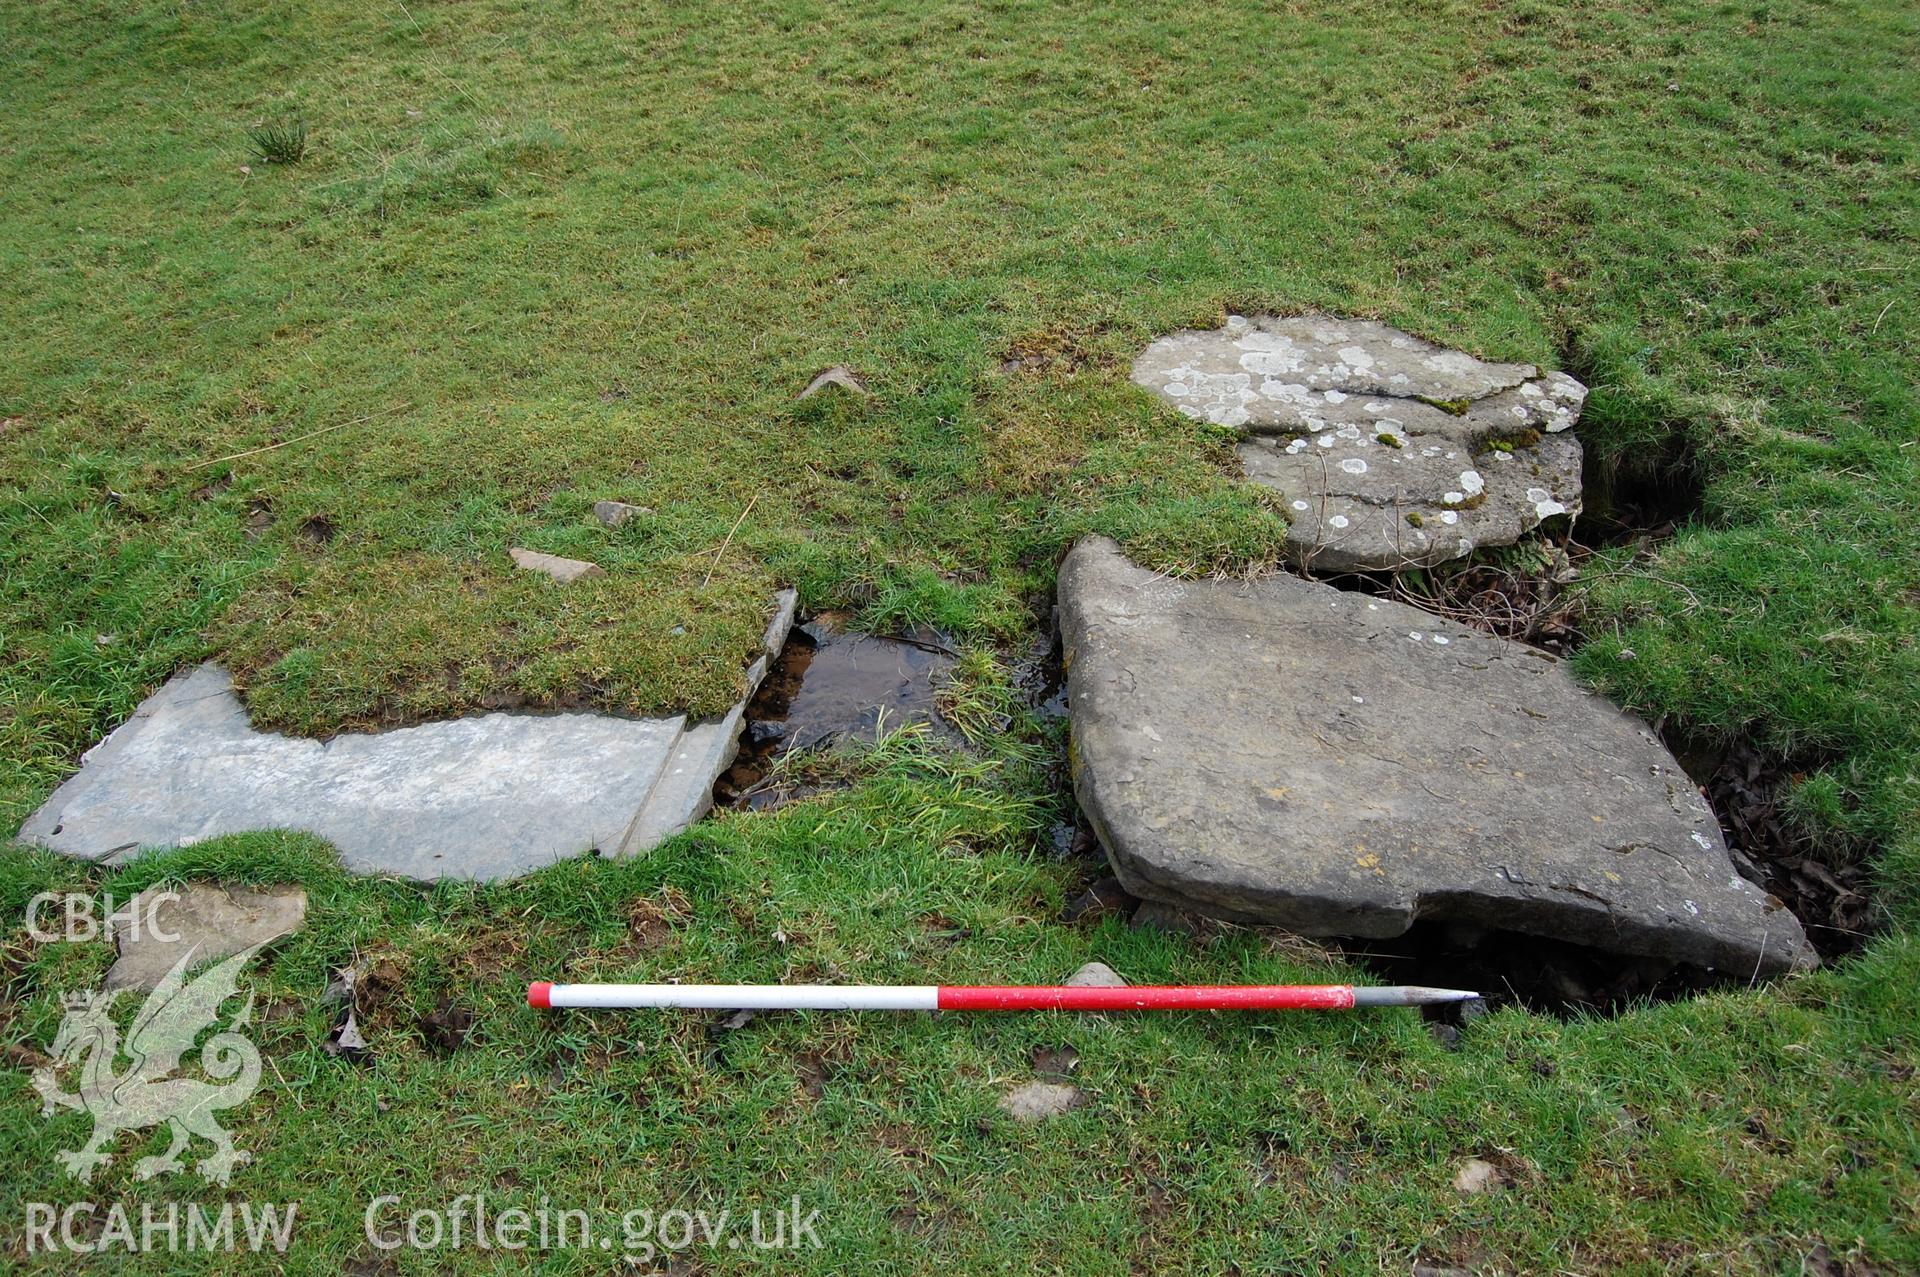 Digital photograph from an archaeological assessment of Deganwy Castle, carried out by Gwynedd Archaeological Trust, 2009. Slabs covering culvert at possible location of tank.